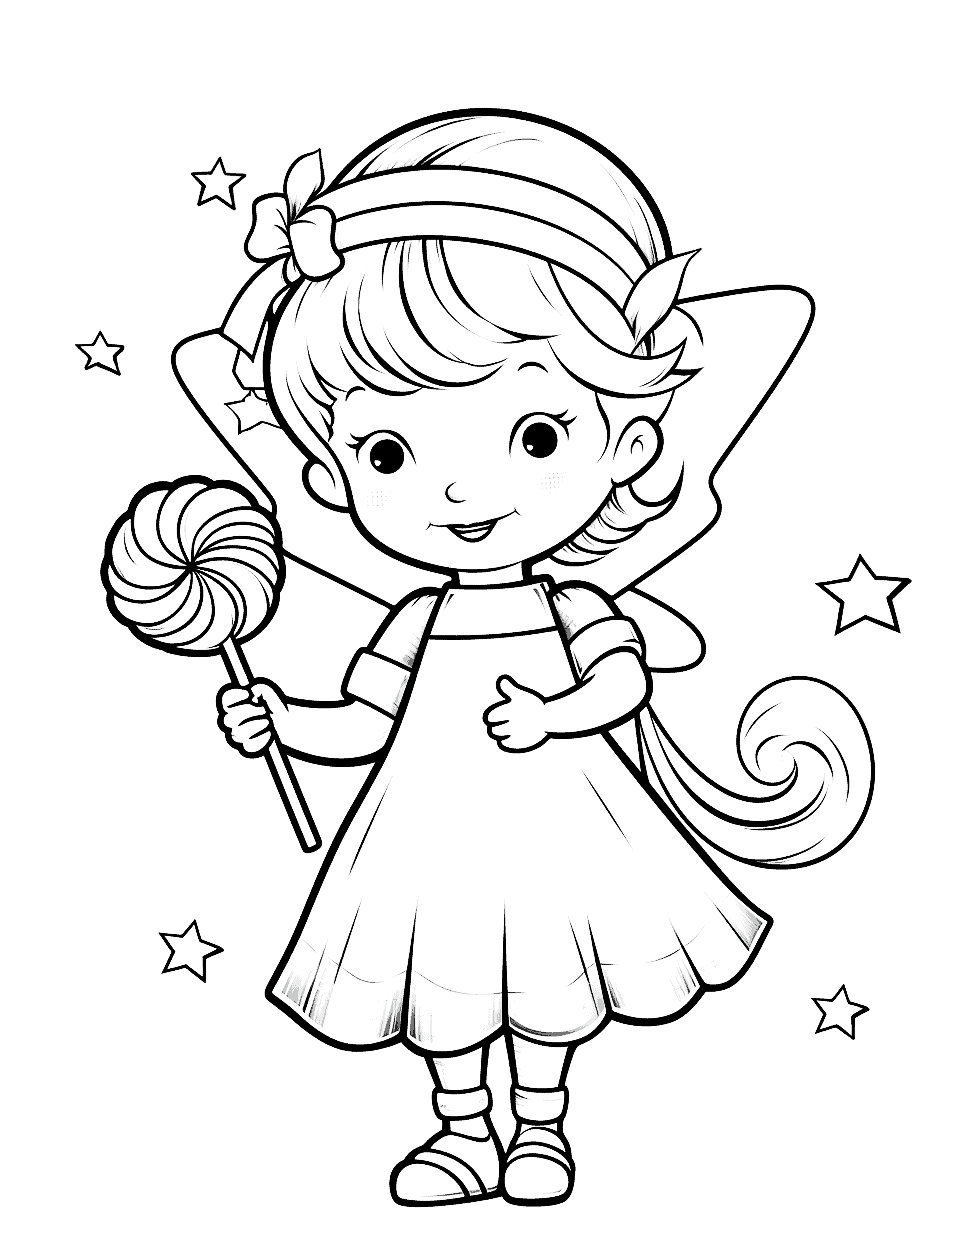 Christmas Fairy Coloring Page - A Christmas fairy spreading festive cheer with her magic wand.